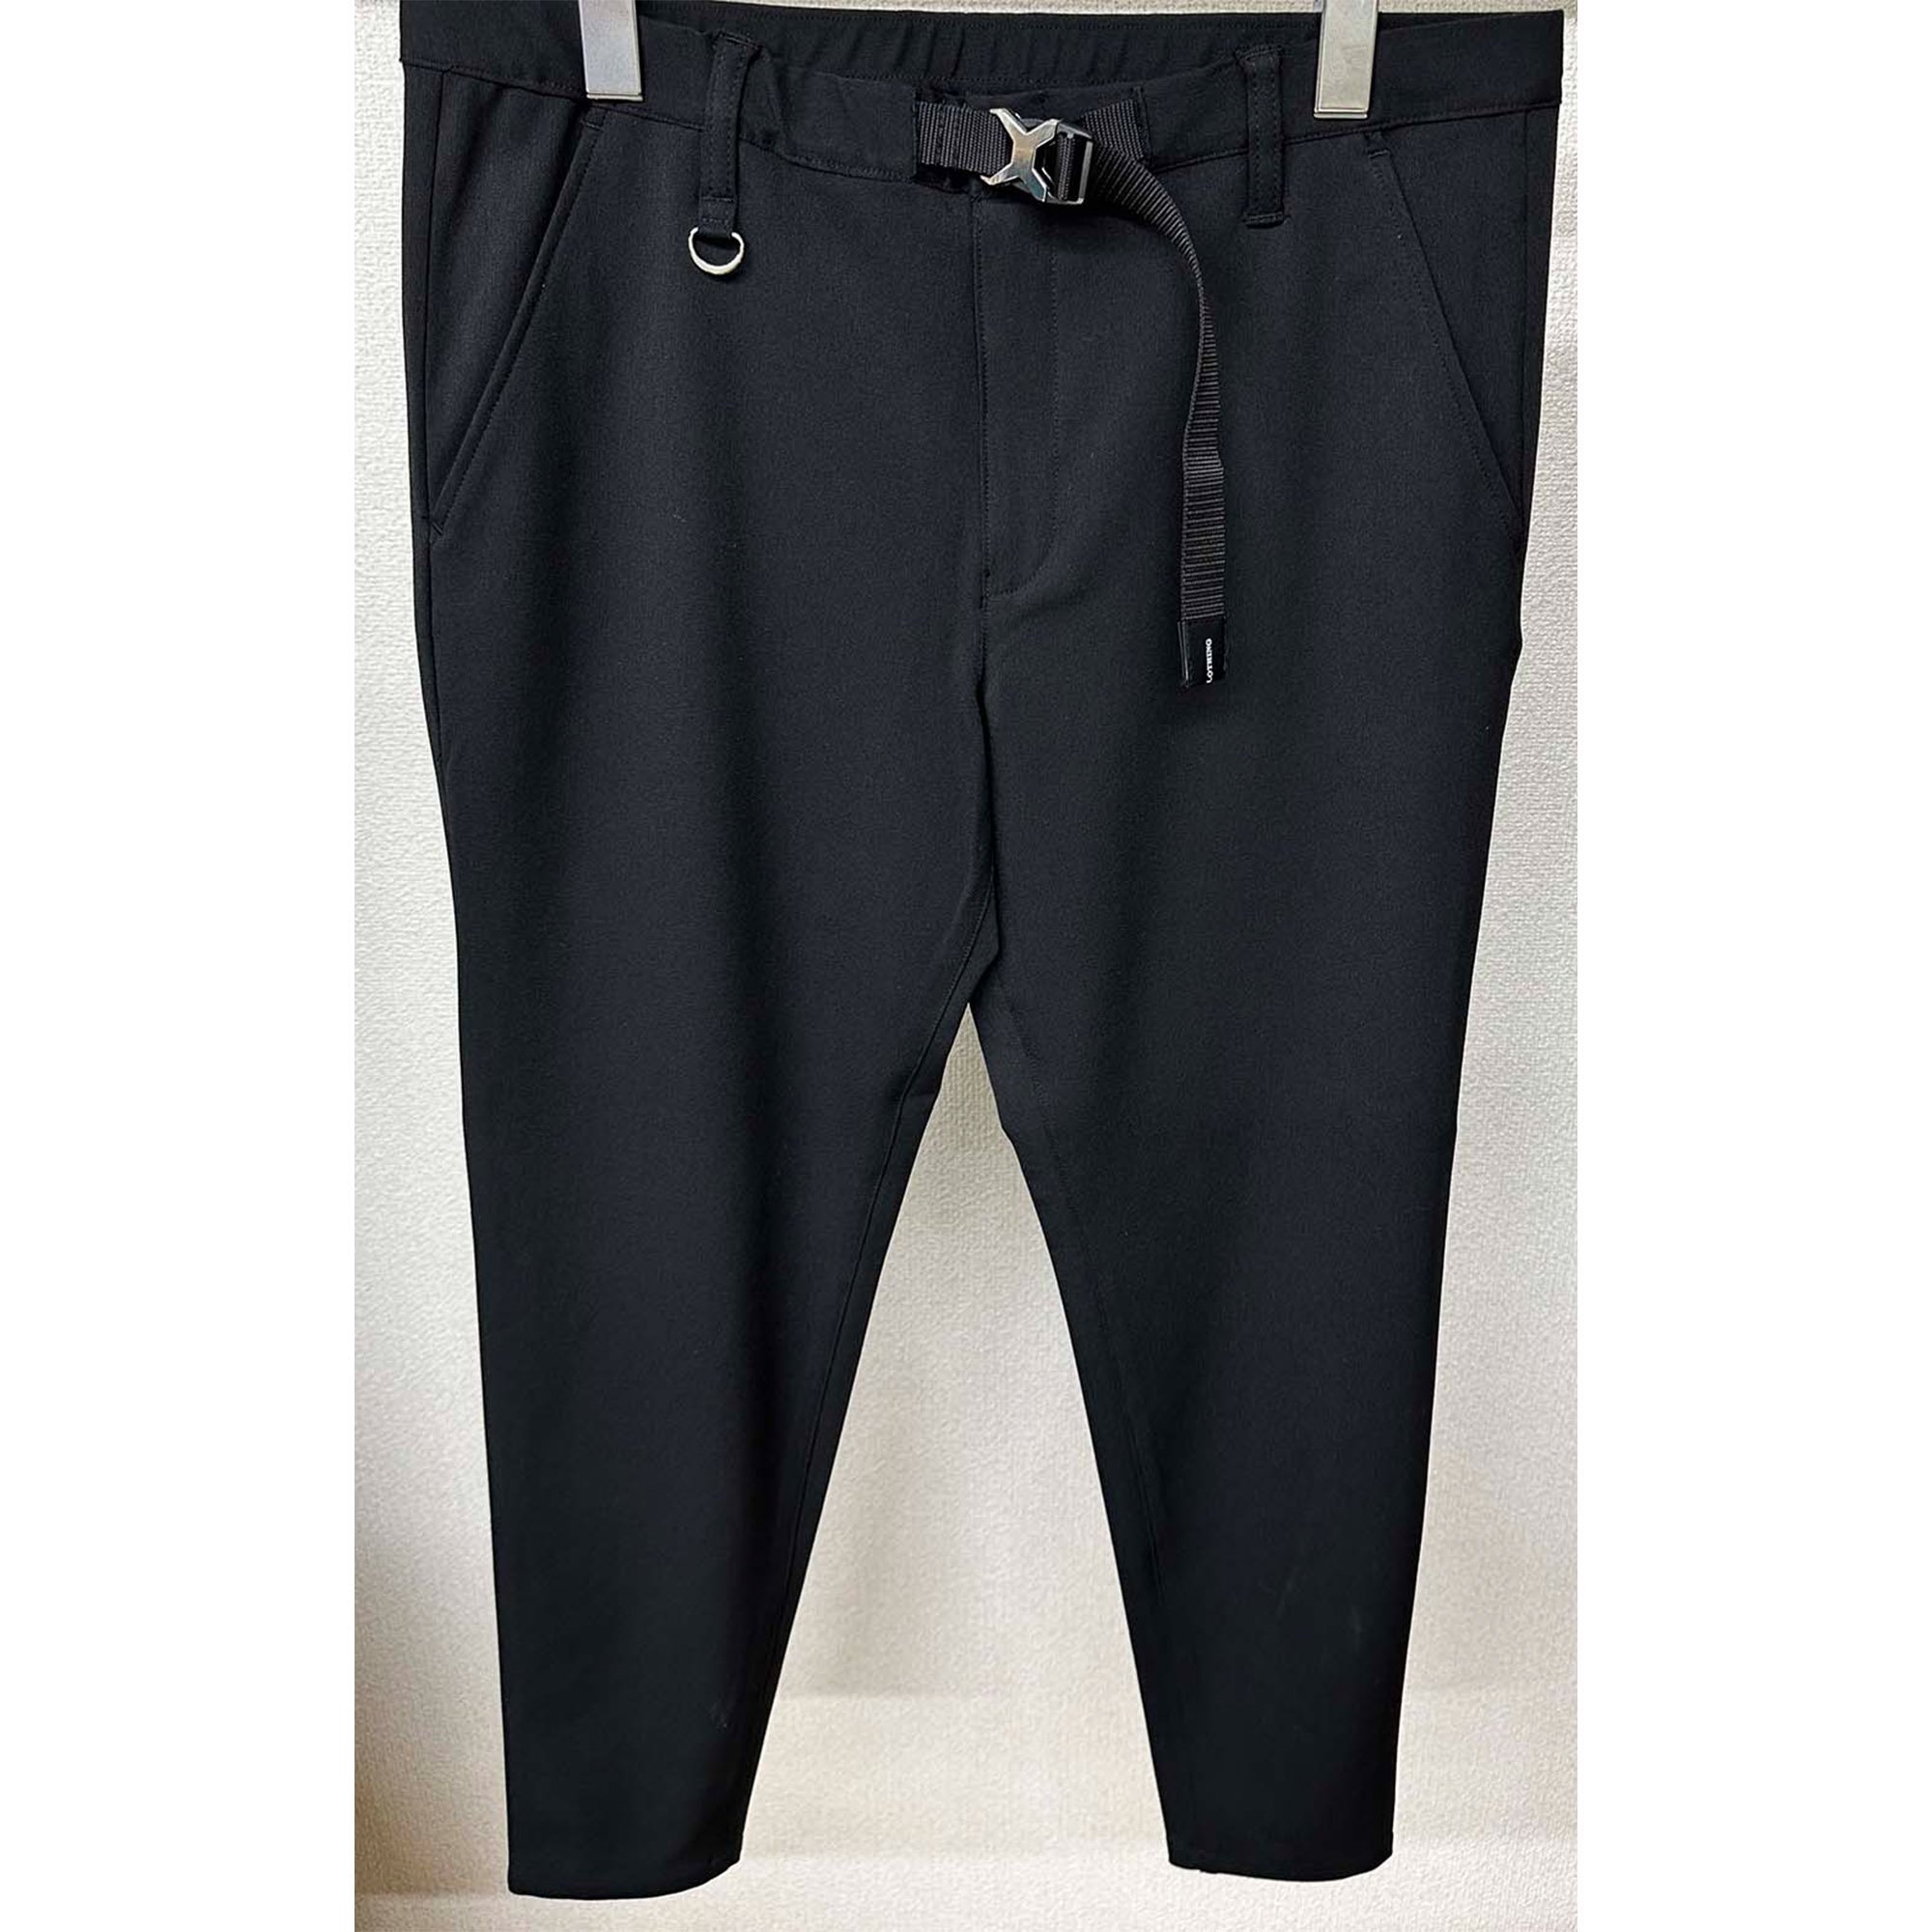 <img class='new_mark_img1' src='https://img.shop-pro.jp/img/new/icons1.gif' style='border:none;display:inline;margin:0px;padding:0px;width:auto;' />PAT TIGHT EASY PANTS BLACK